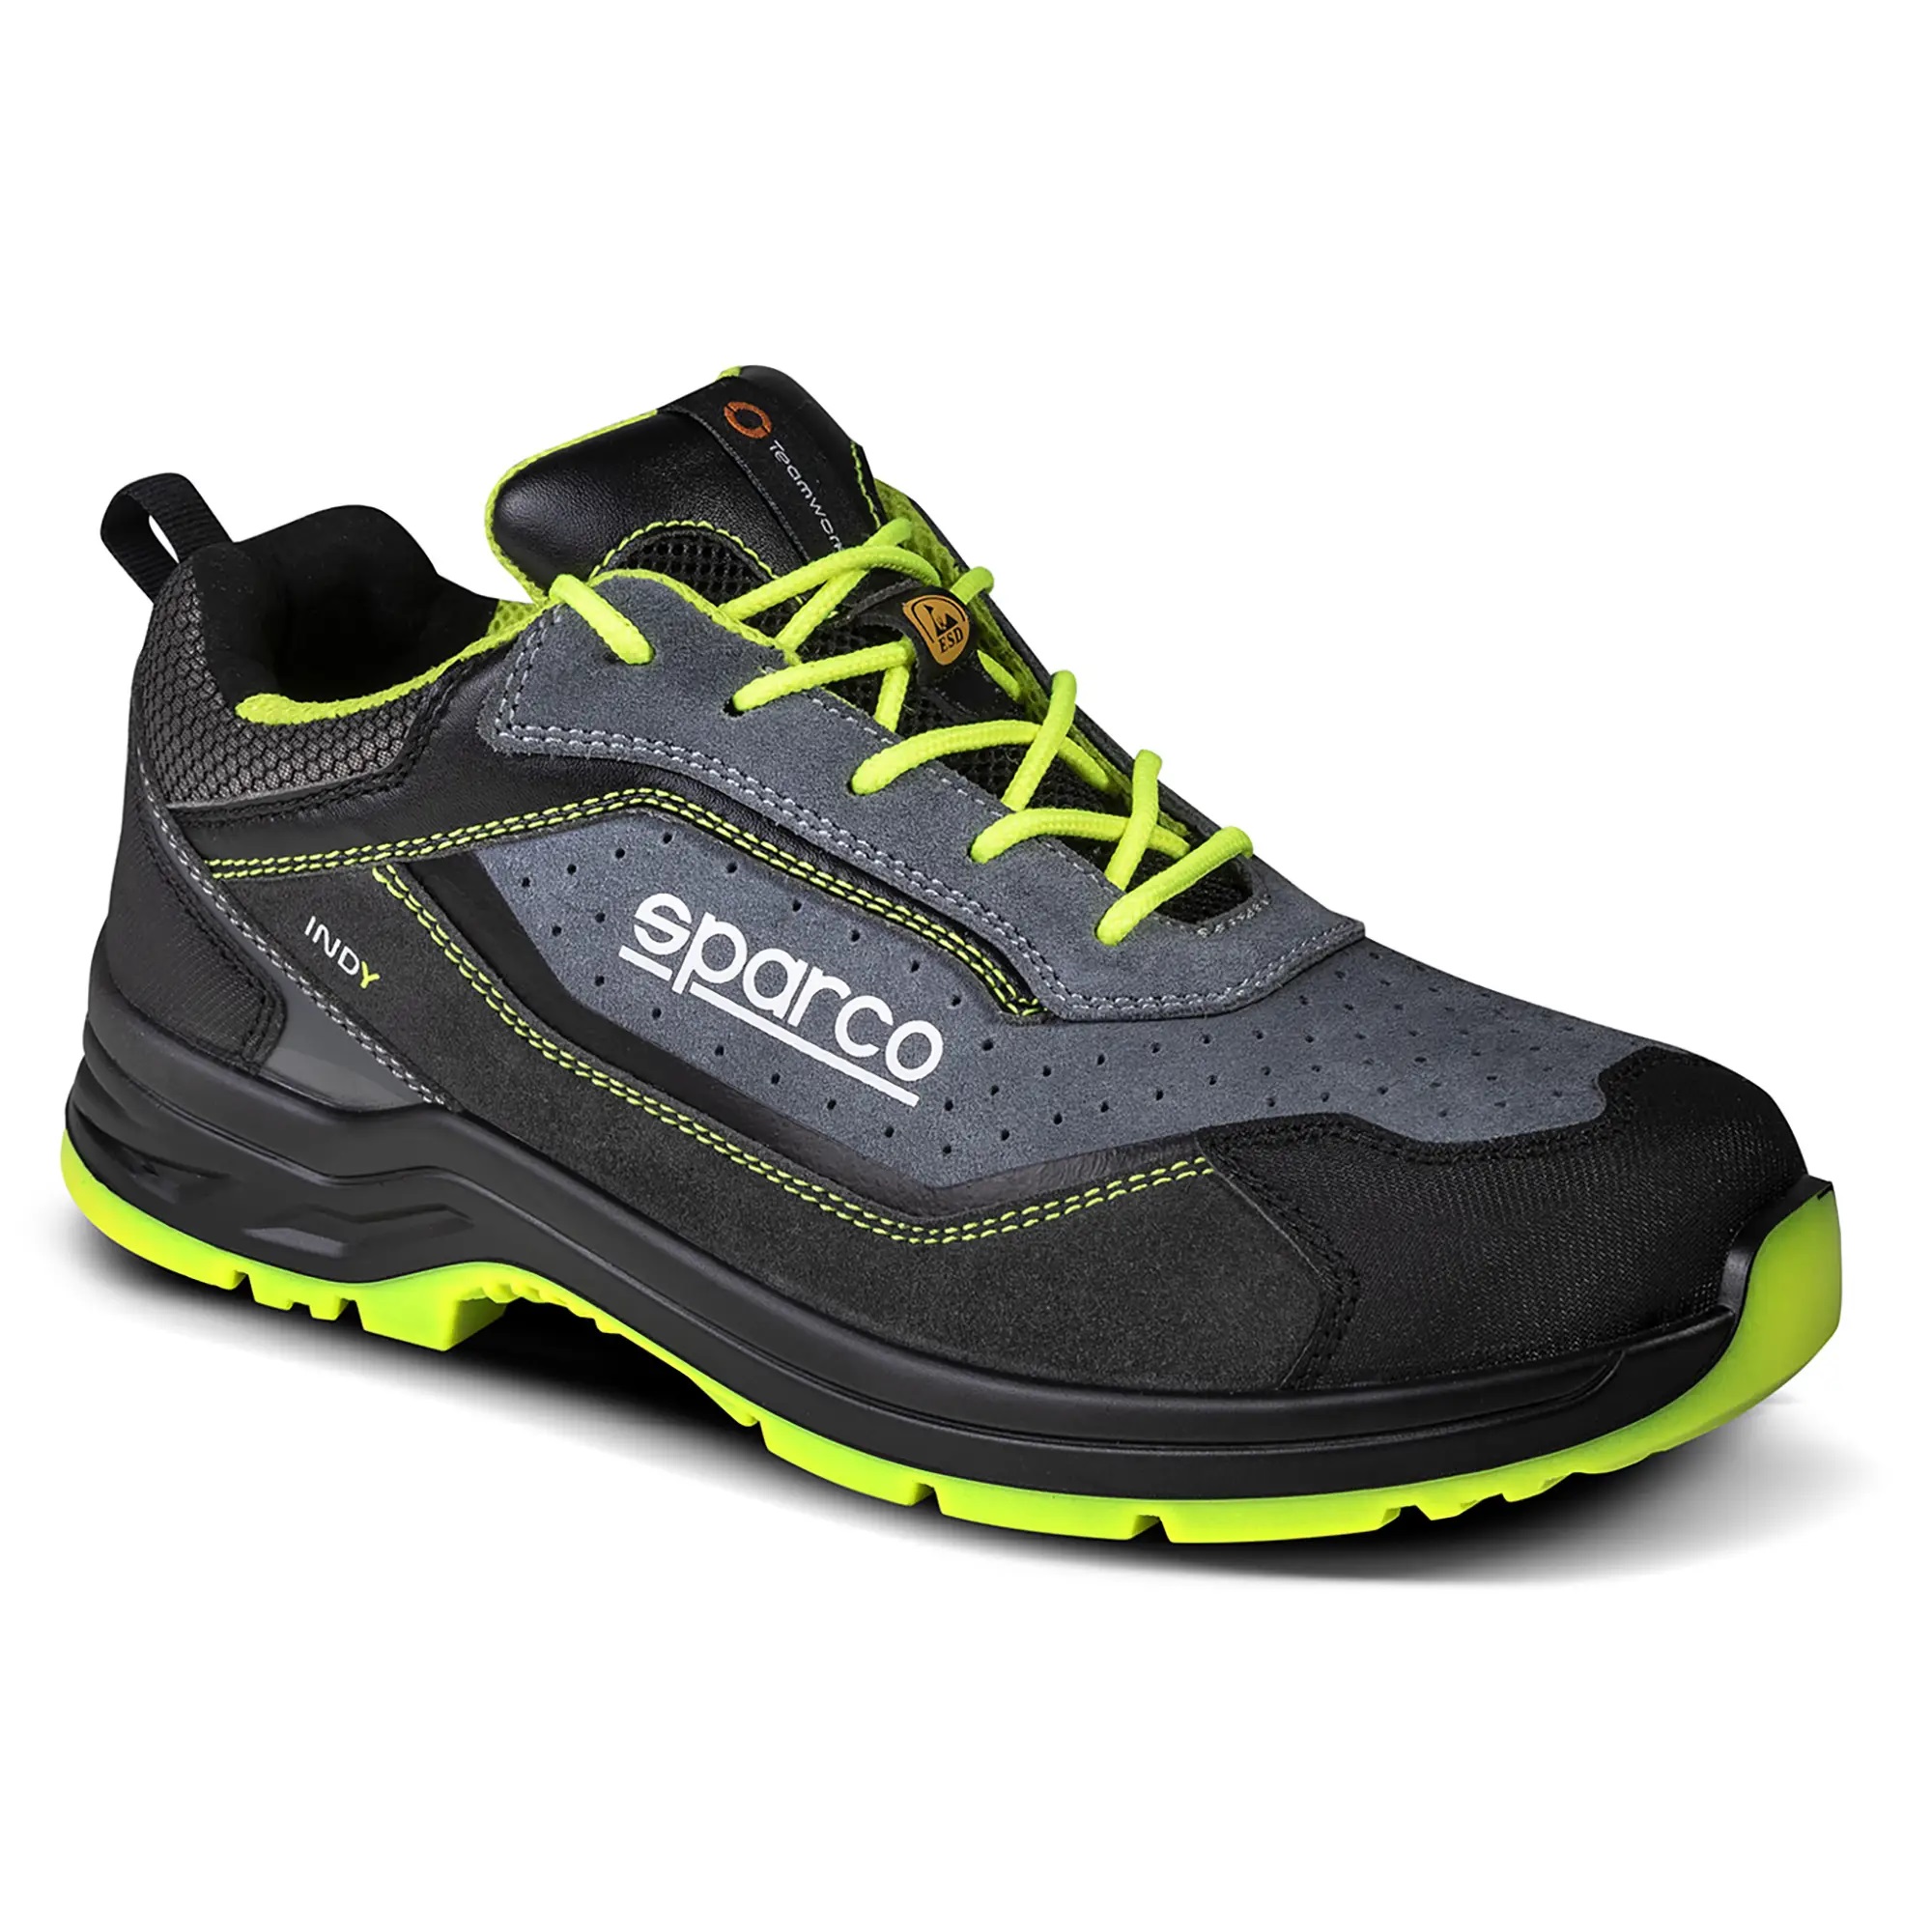 Scarpa bassa SPARCO S1PS INDY TEXAS Antinfortunistica